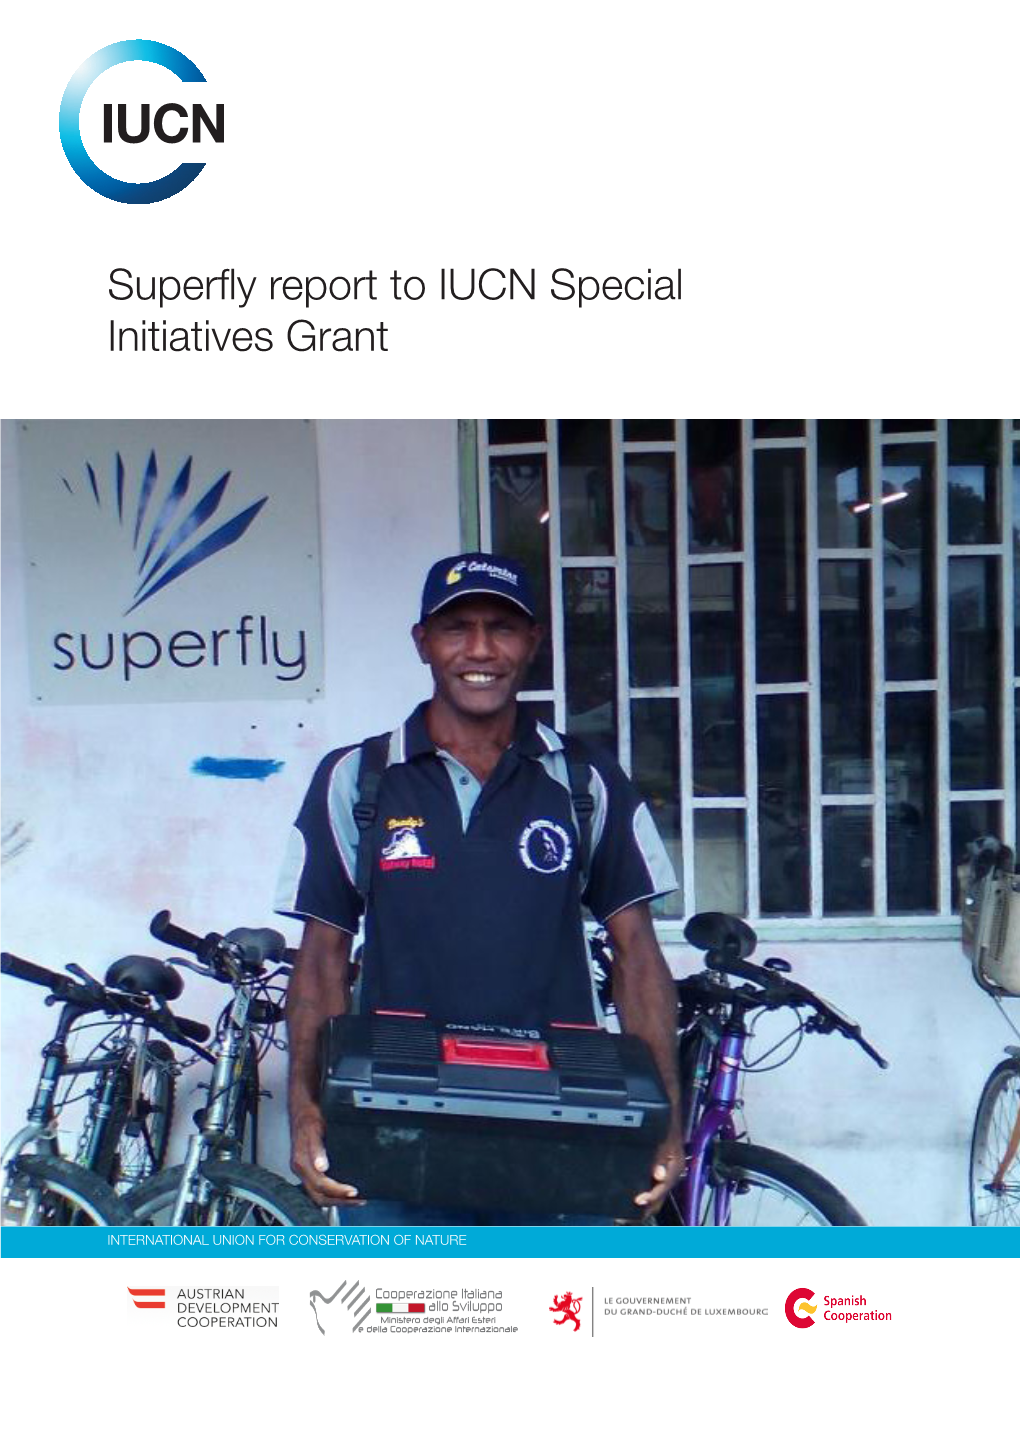 Superfly Report to IUCN Special Initiatives Grant